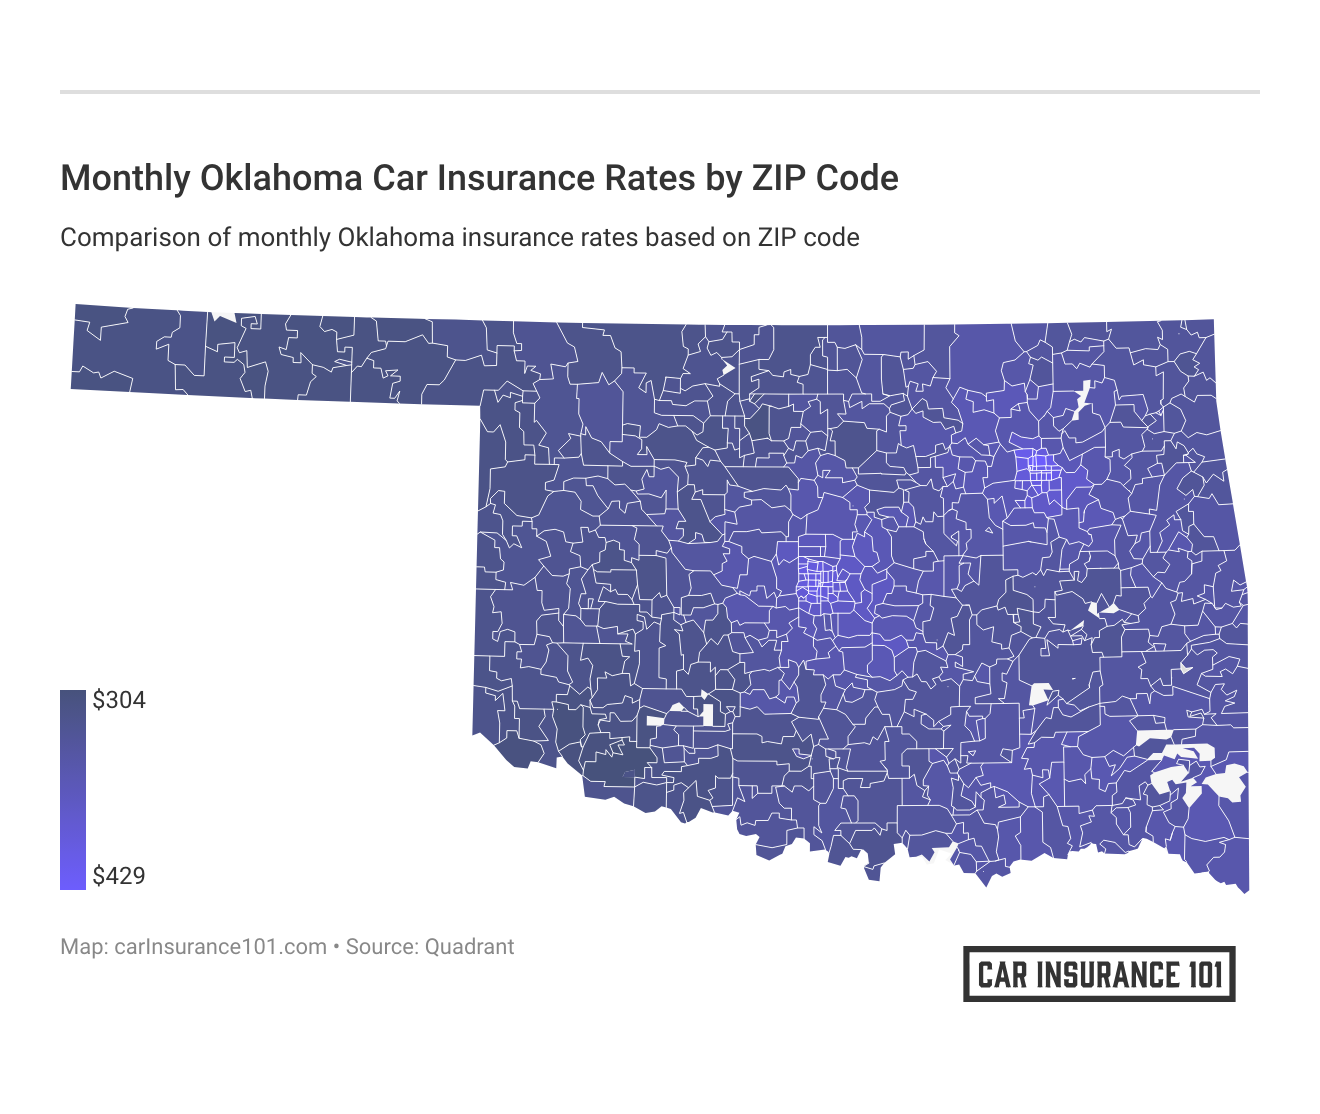 <h3>Monthly Oklahoma Car Insurance Rates by ZIP Code</h3>